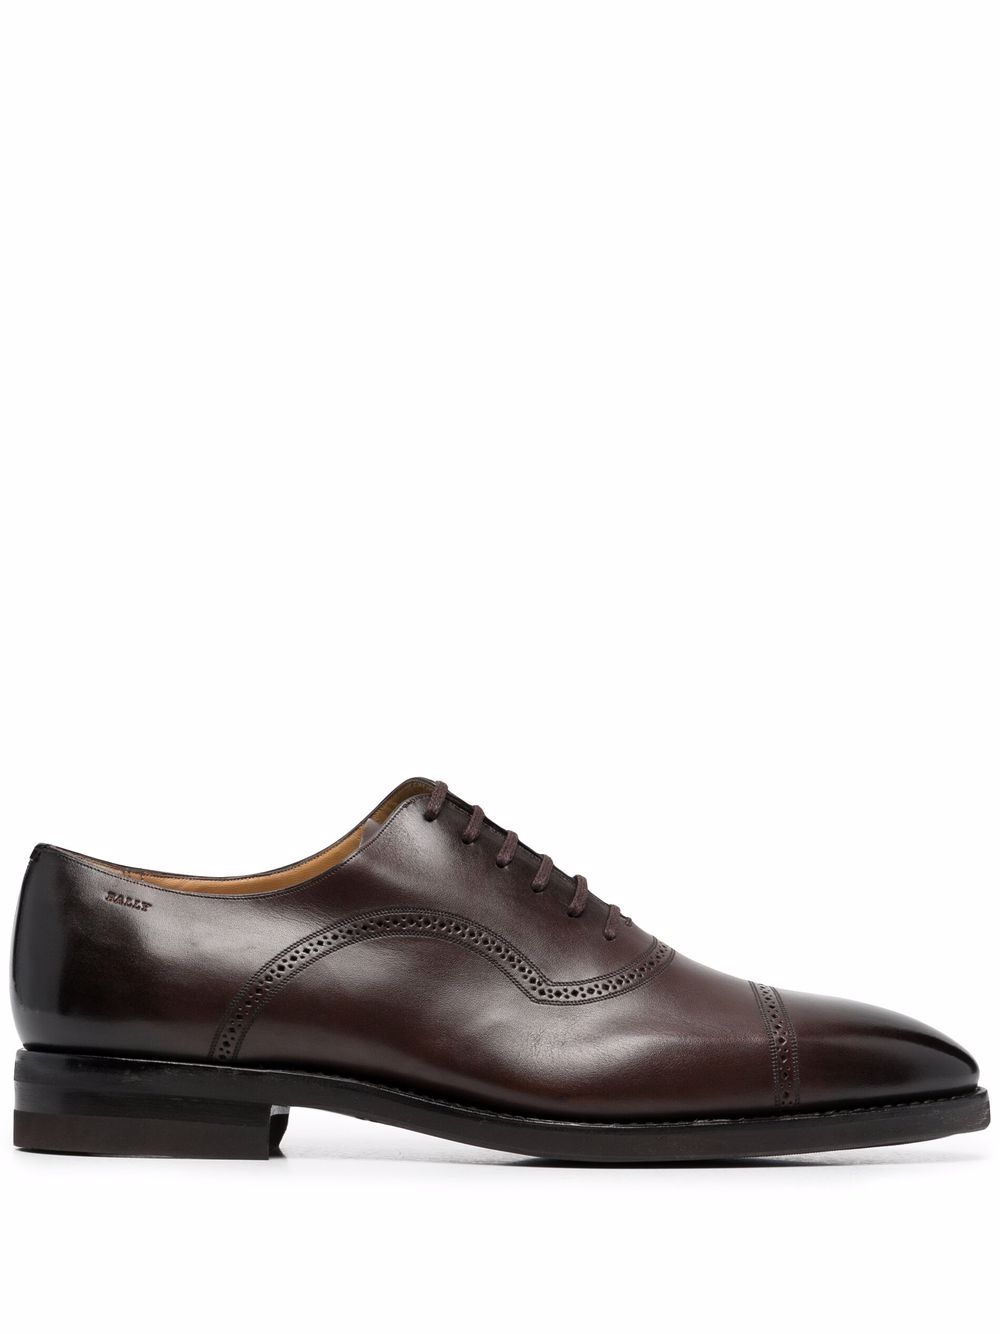 Bally Scotch lace-up leather Oxford shoes - Brown von Bally